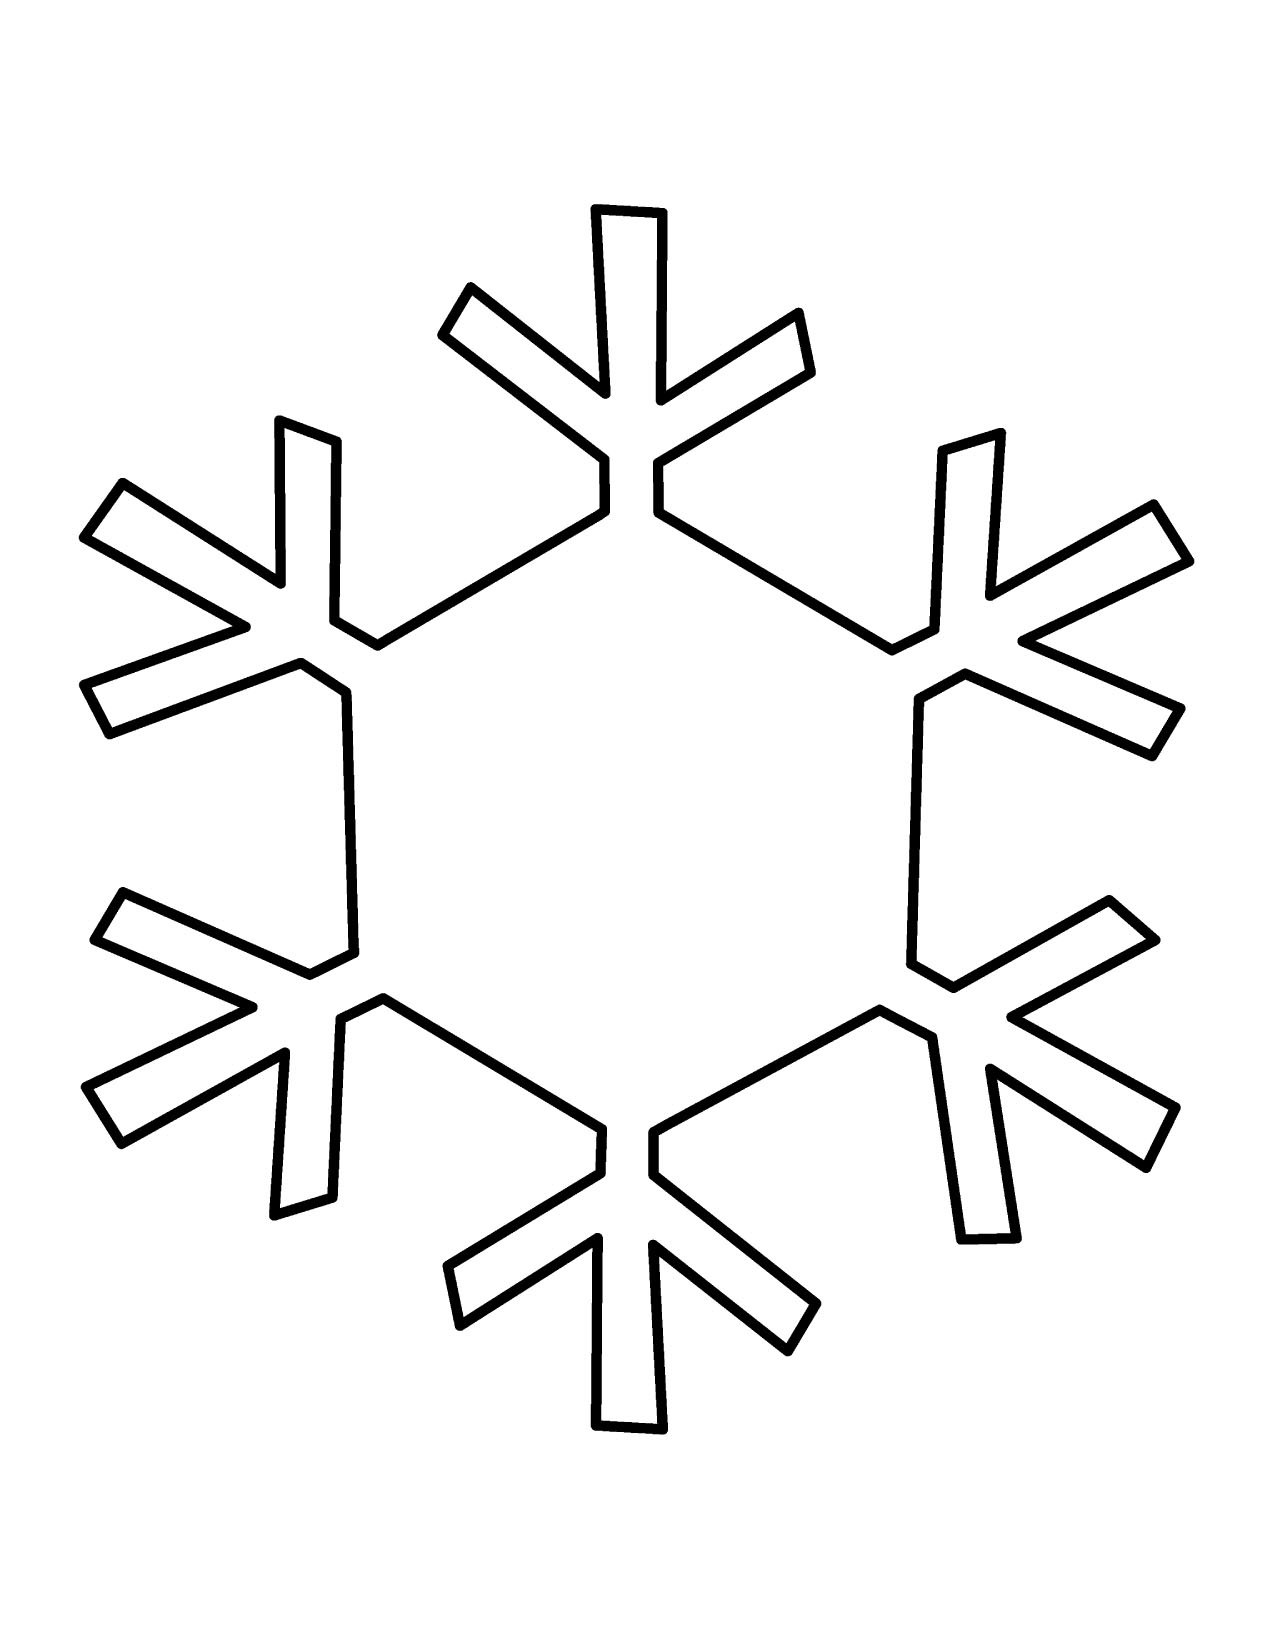 Simple snowflake clipart free clipart images